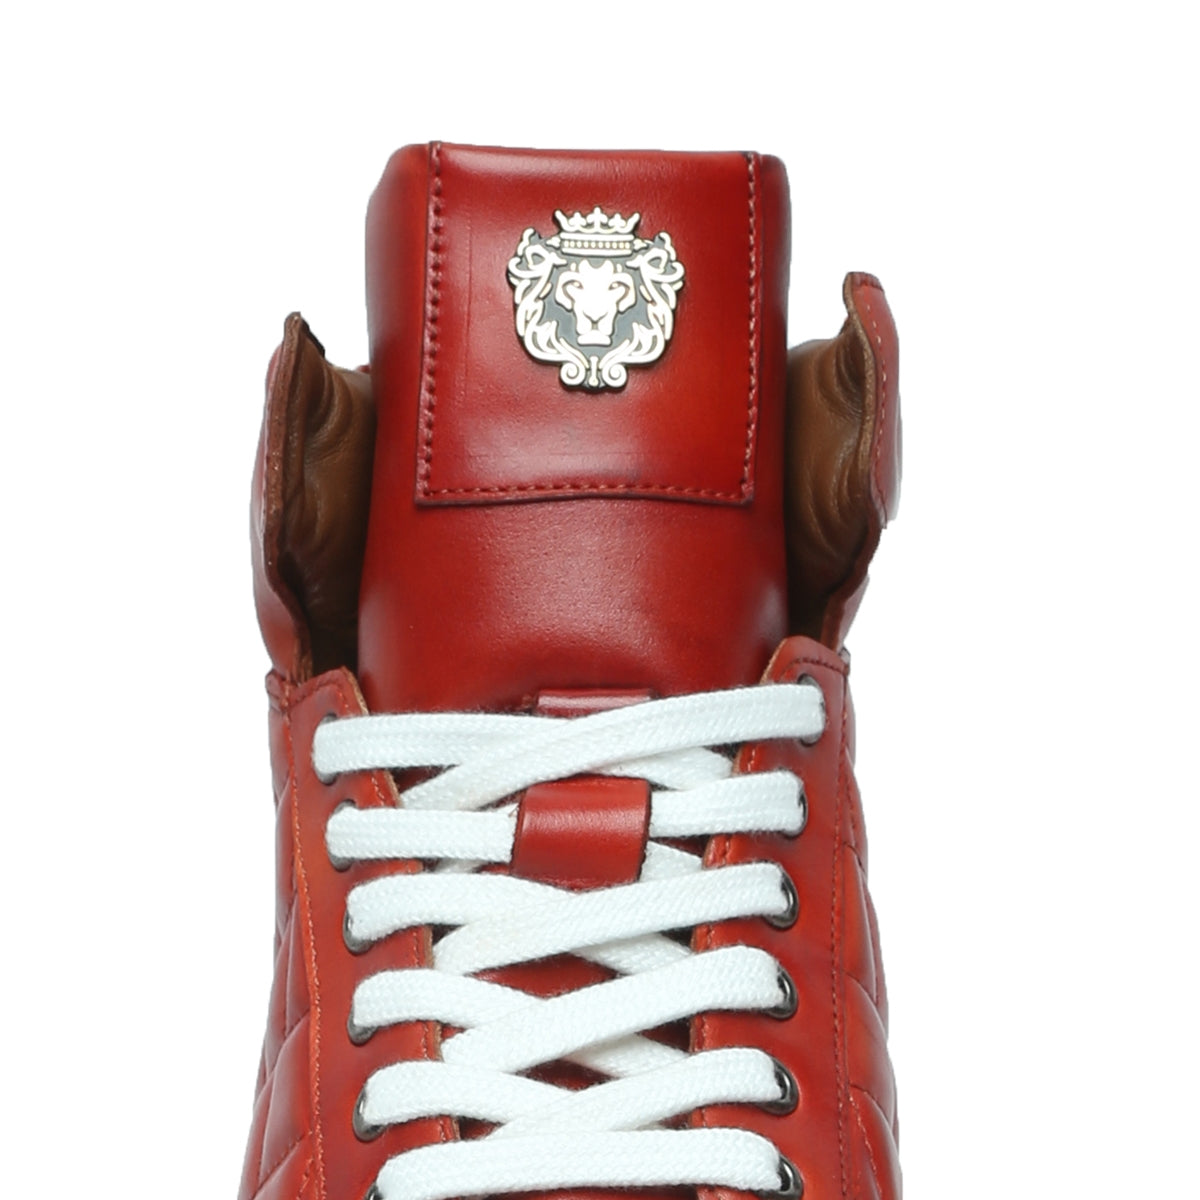 Diamond Stitch Mid-Top Sneaker on Blood Red Color by Brune & Bareskin